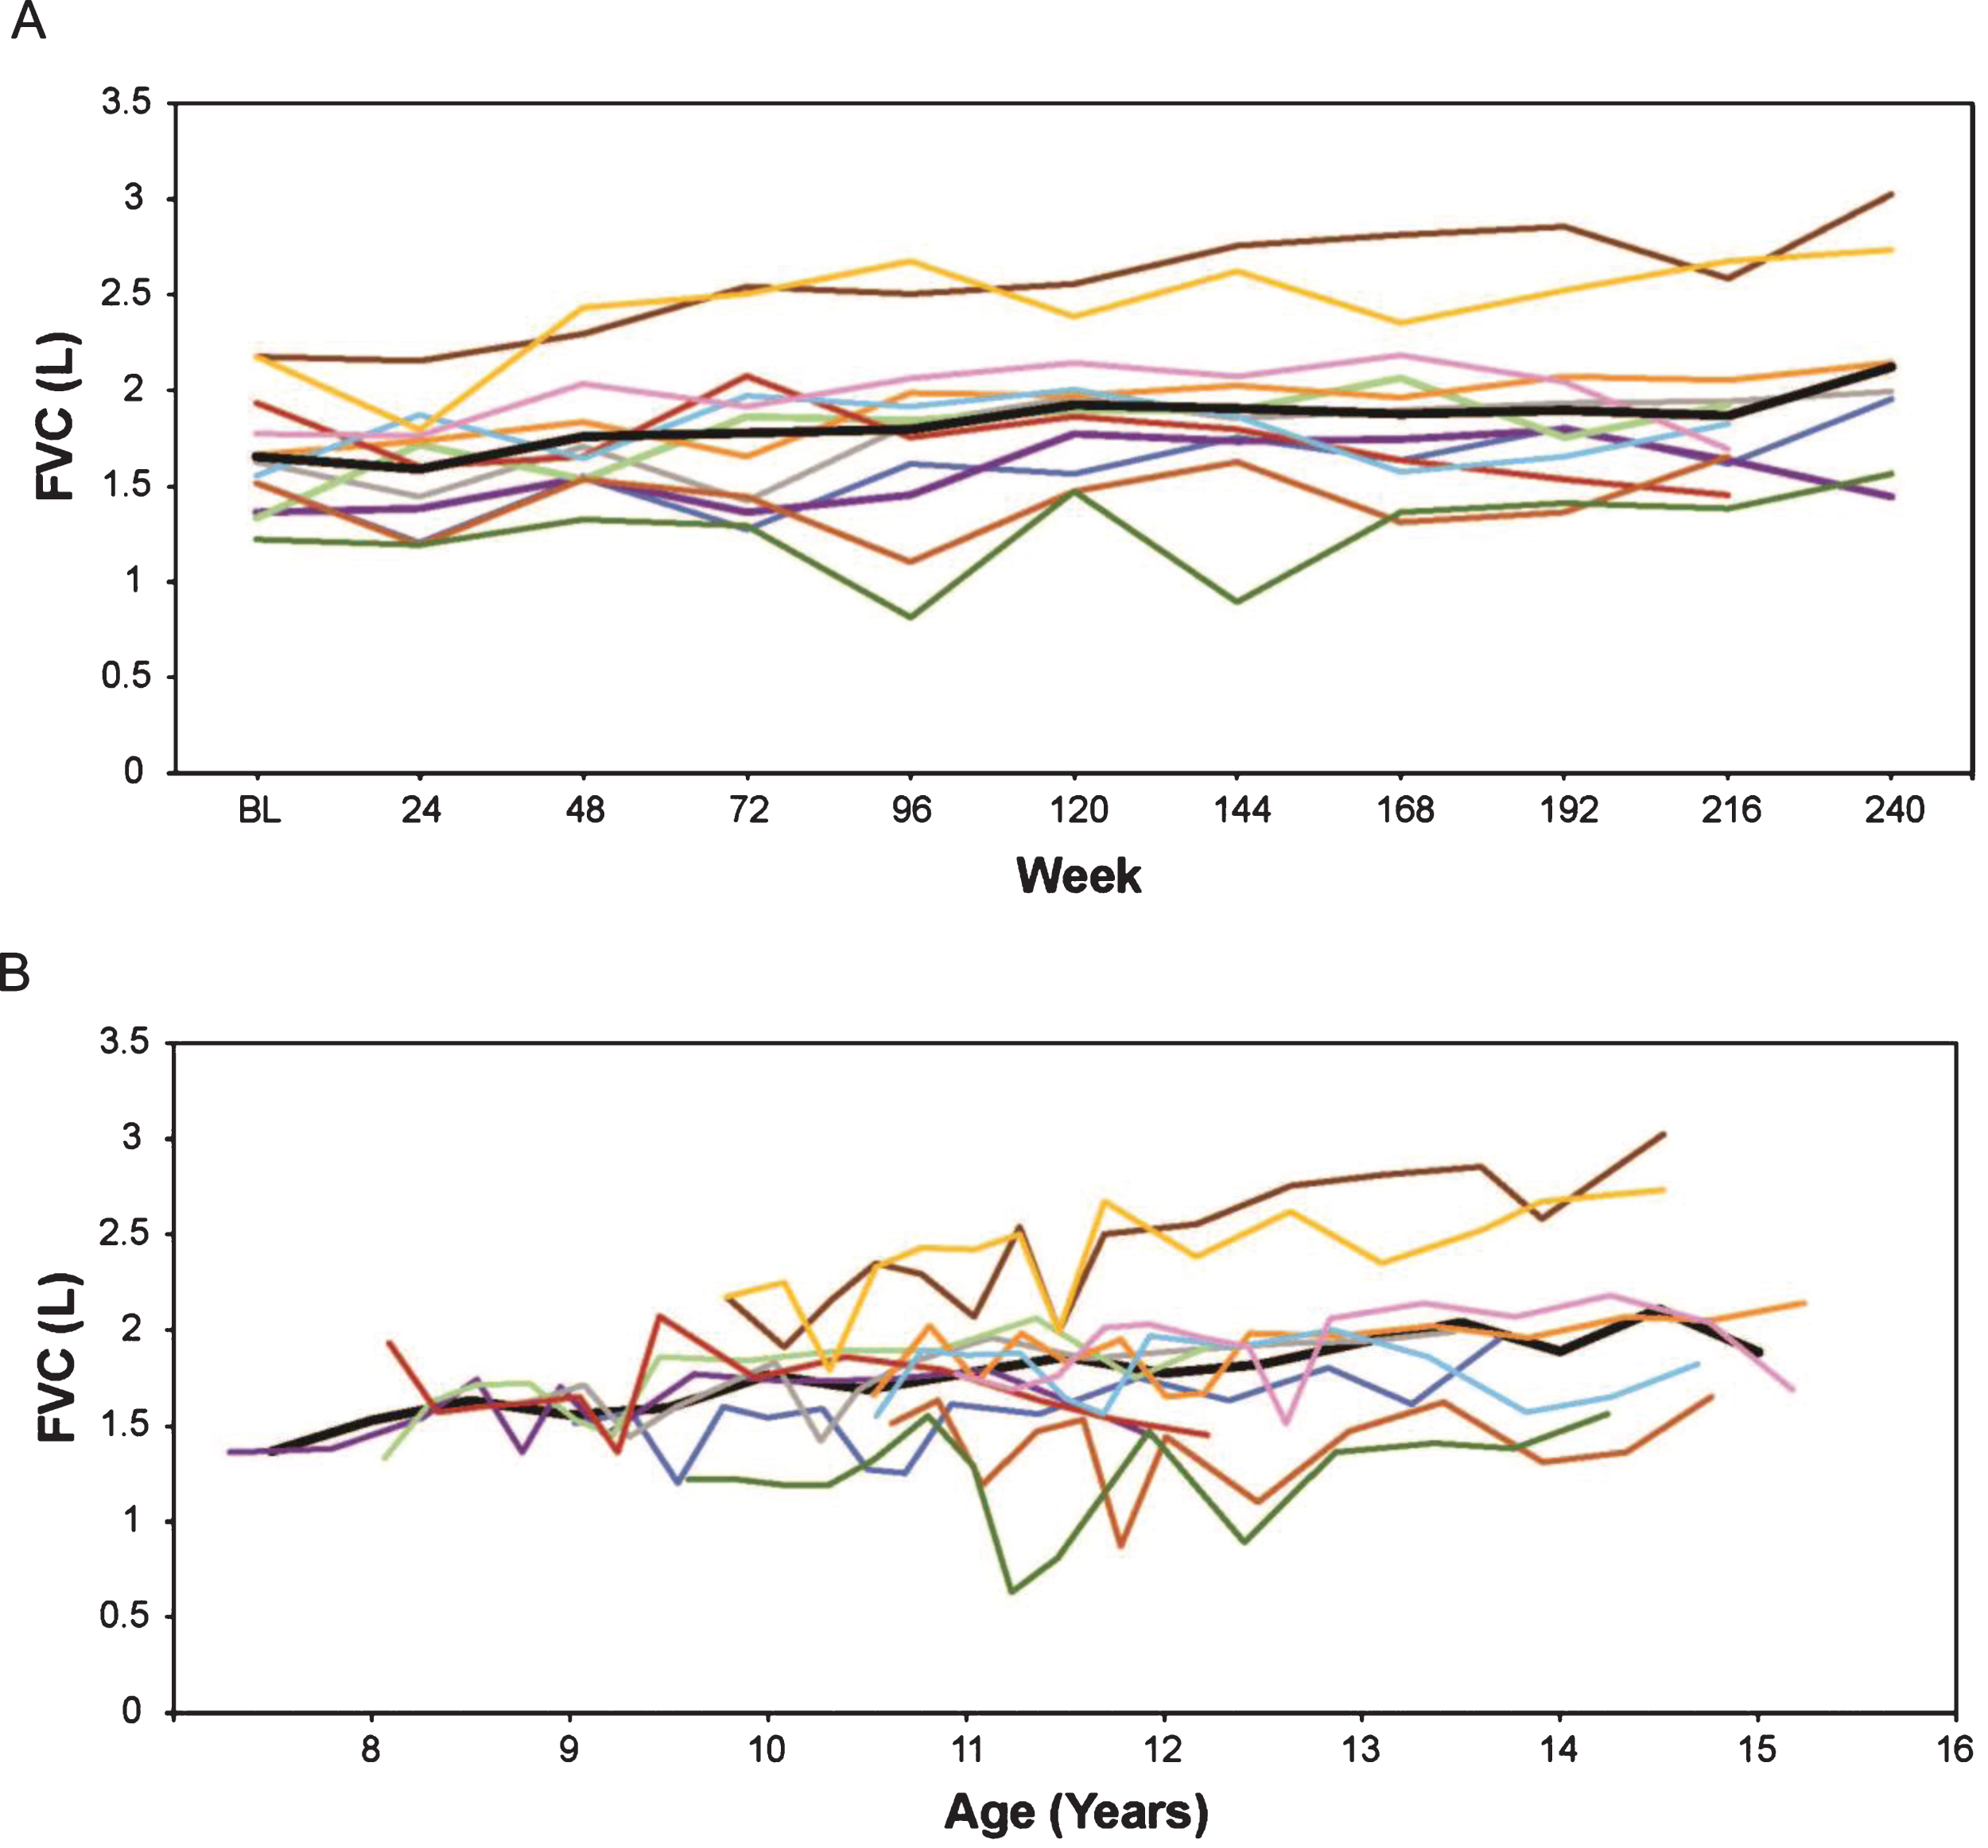 (A) FVC in liters by weeks on treatment, and (B) FVC in liters versus age (rounded to nearest 0.5 year for mean line). Only assessments performed every 24 weeks are represented graphically, although additional time points were assessed during the first 96 weeks. In Figures 2 through 7, the thick black line represents the mean while individual patients are represented by the same colored line throughout. FVC, forced vital capacity.